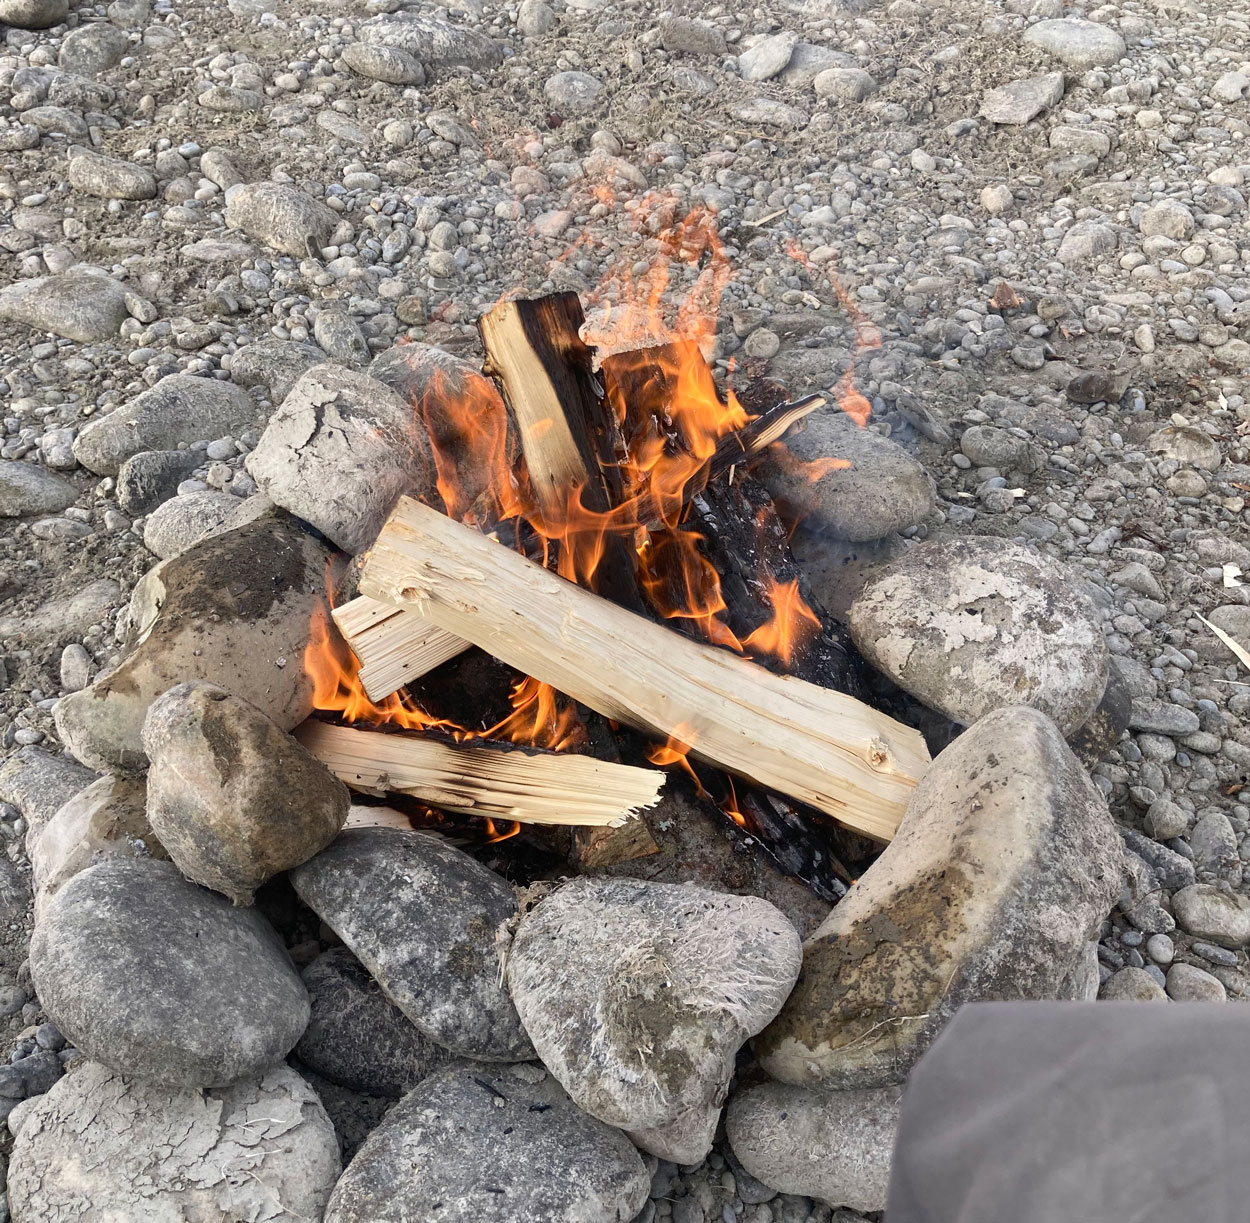 winter fishing float bow river firepit on shore to keep warm.